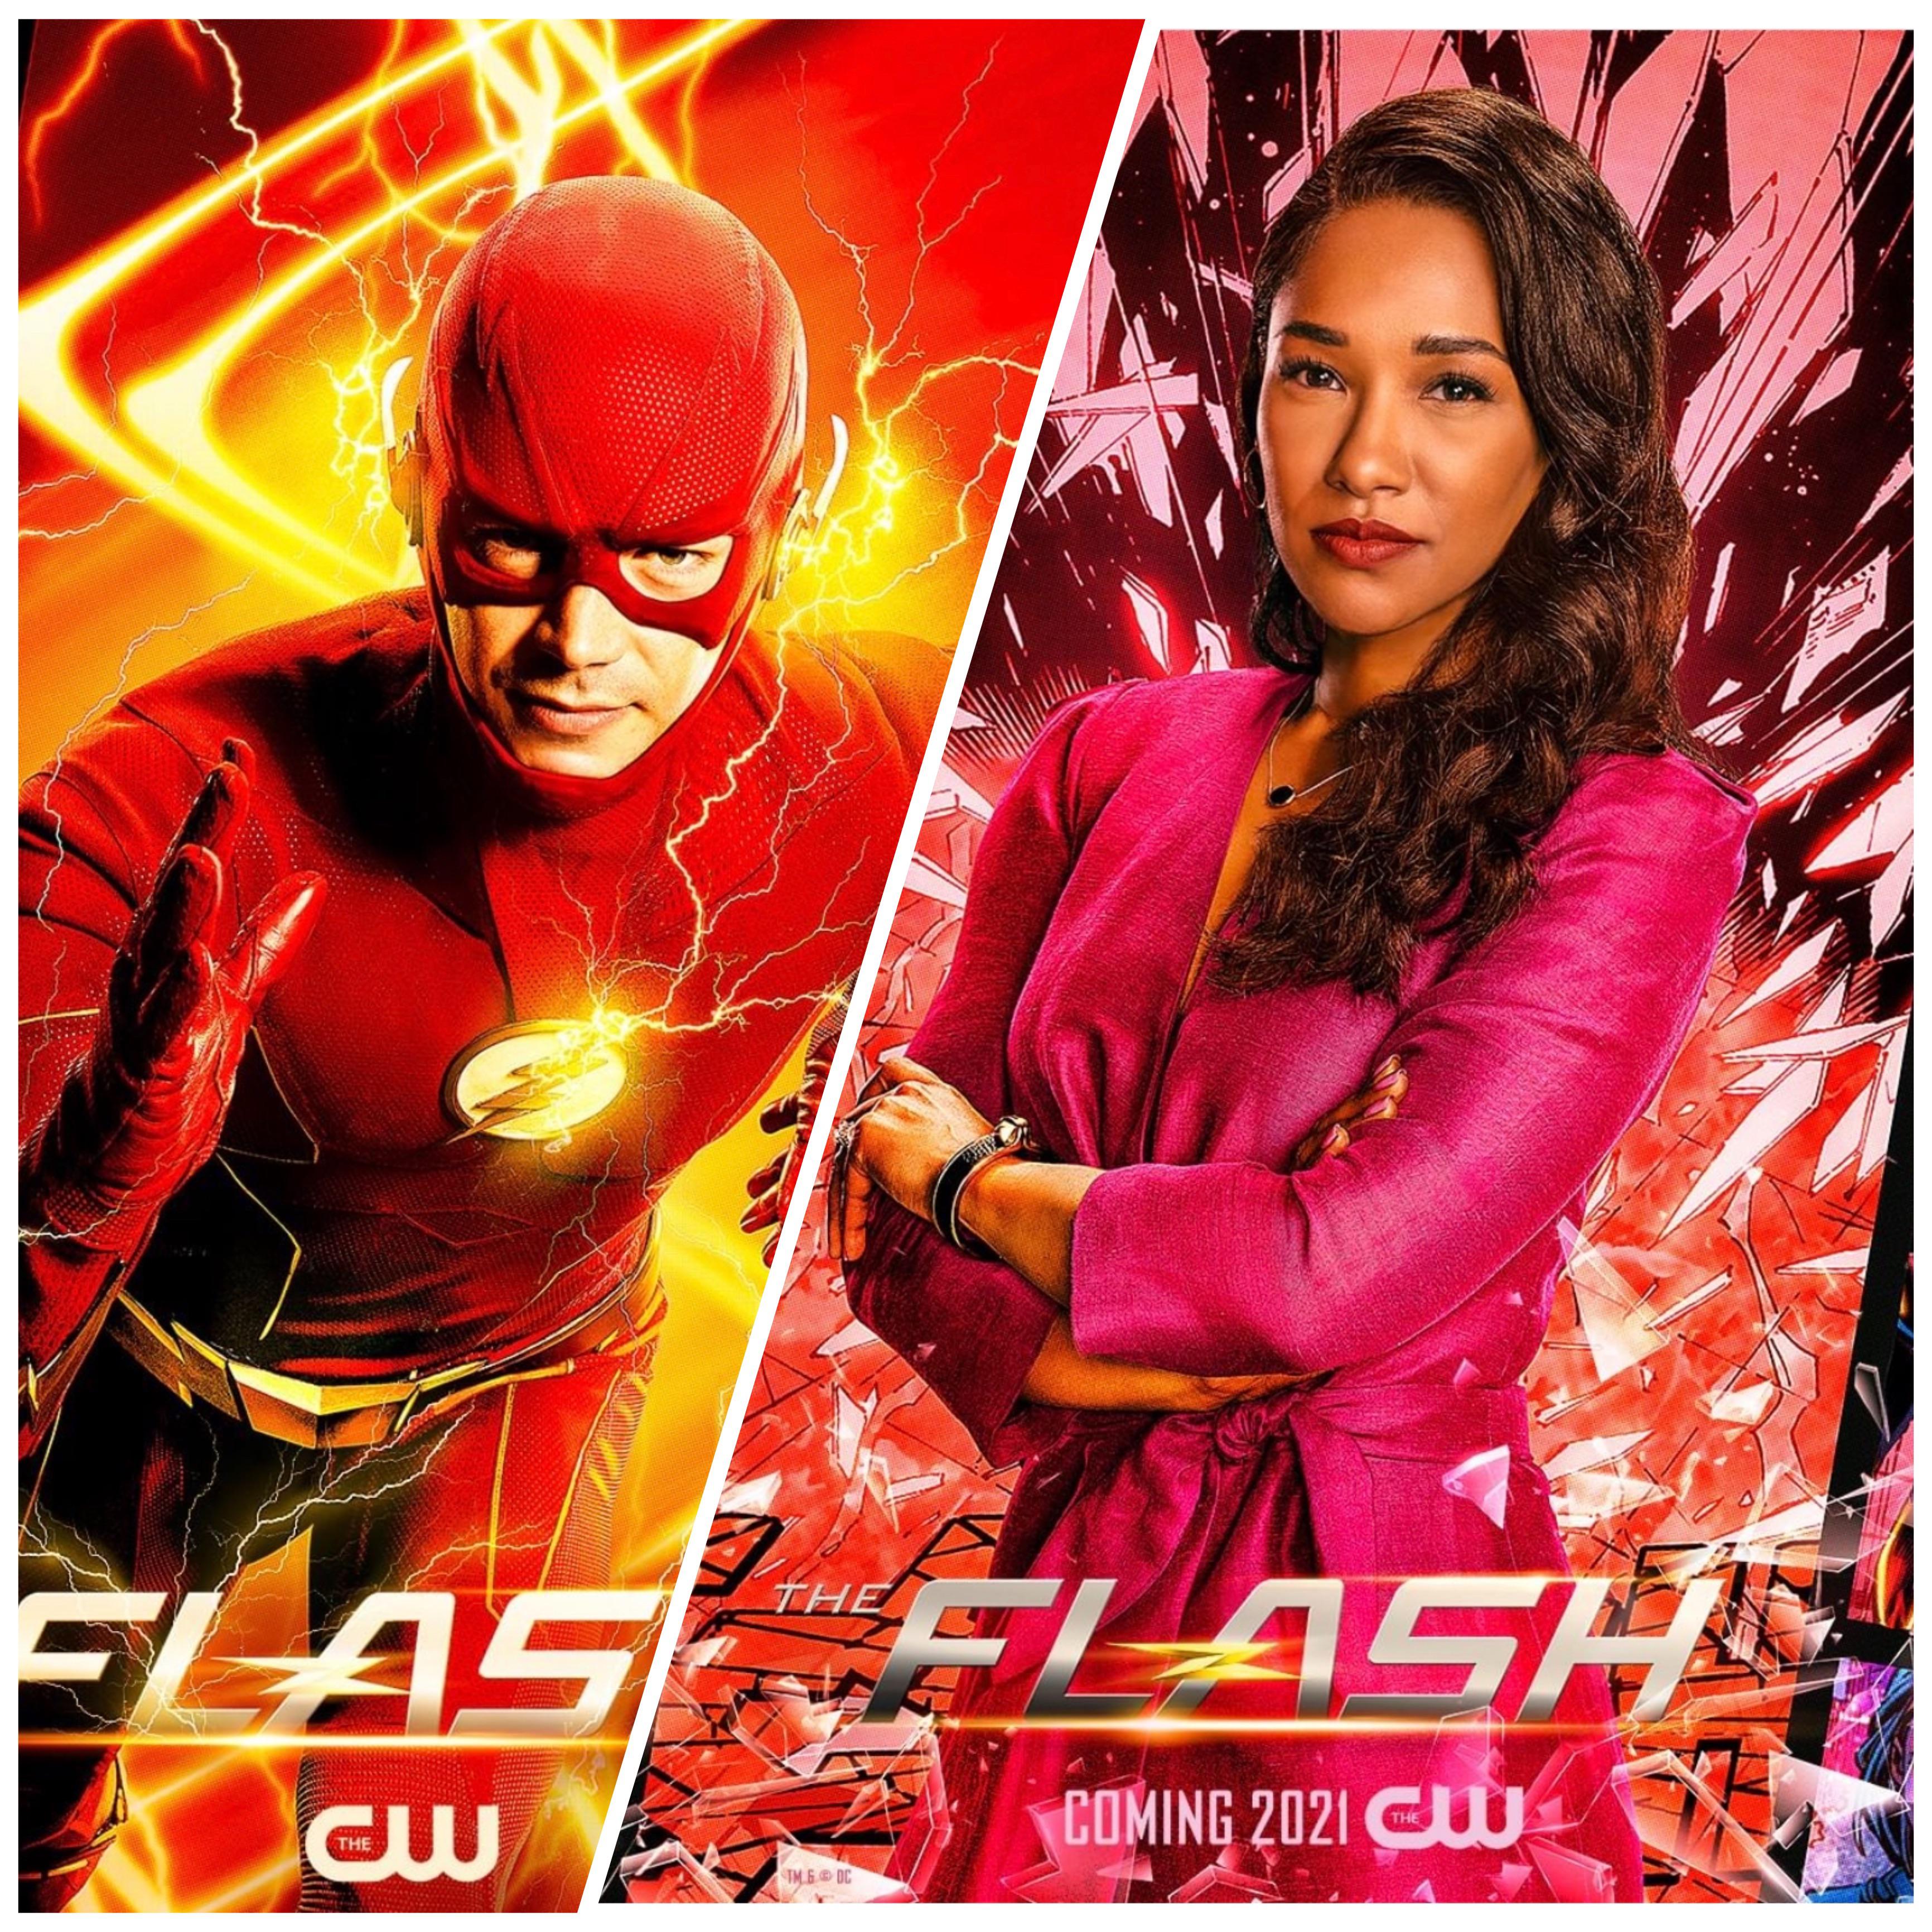 The Flash posters for season 7! Which one do you like better?